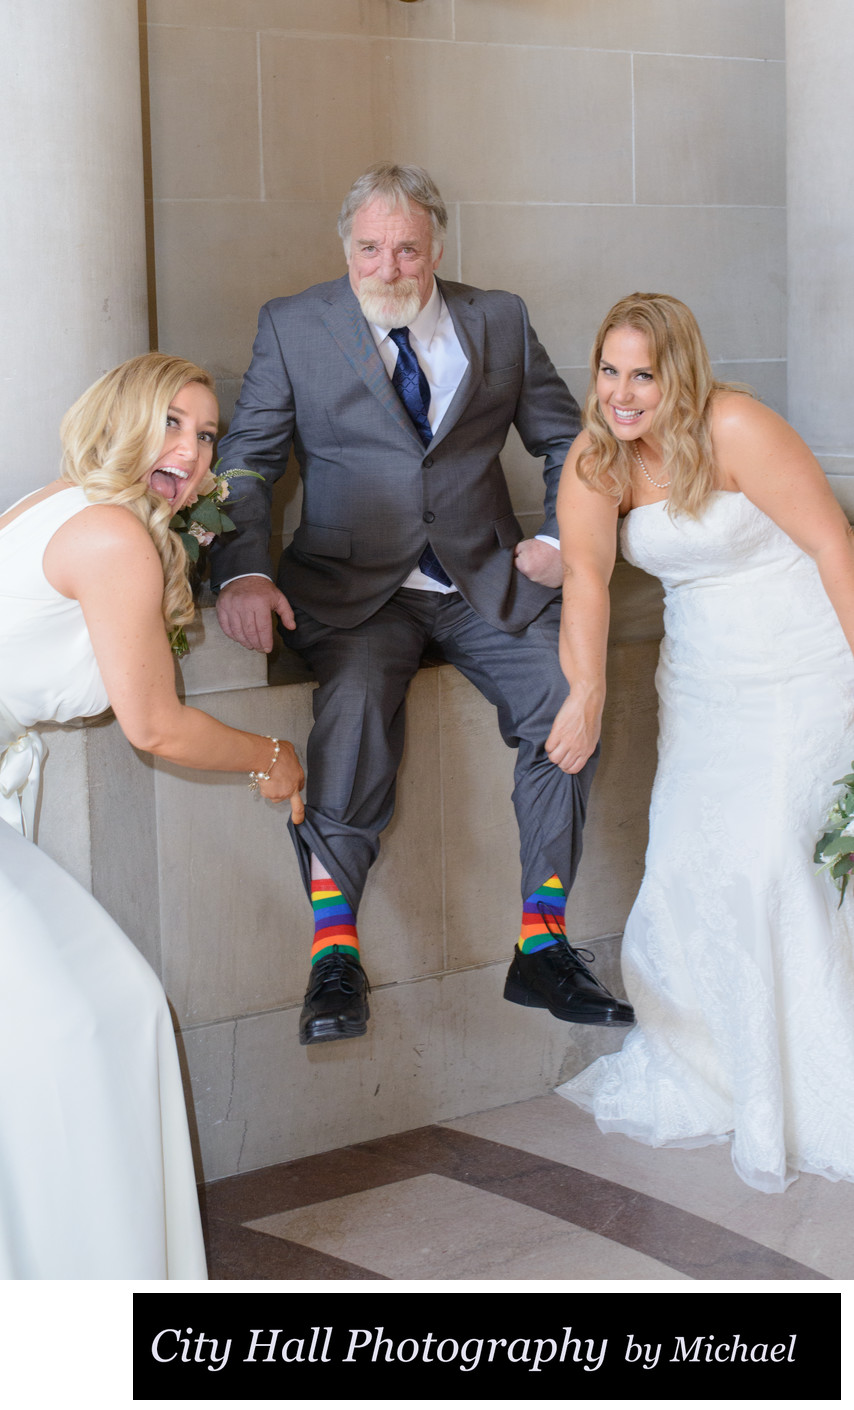 Dads rainbow socks in honor of daughter's gay nuptials